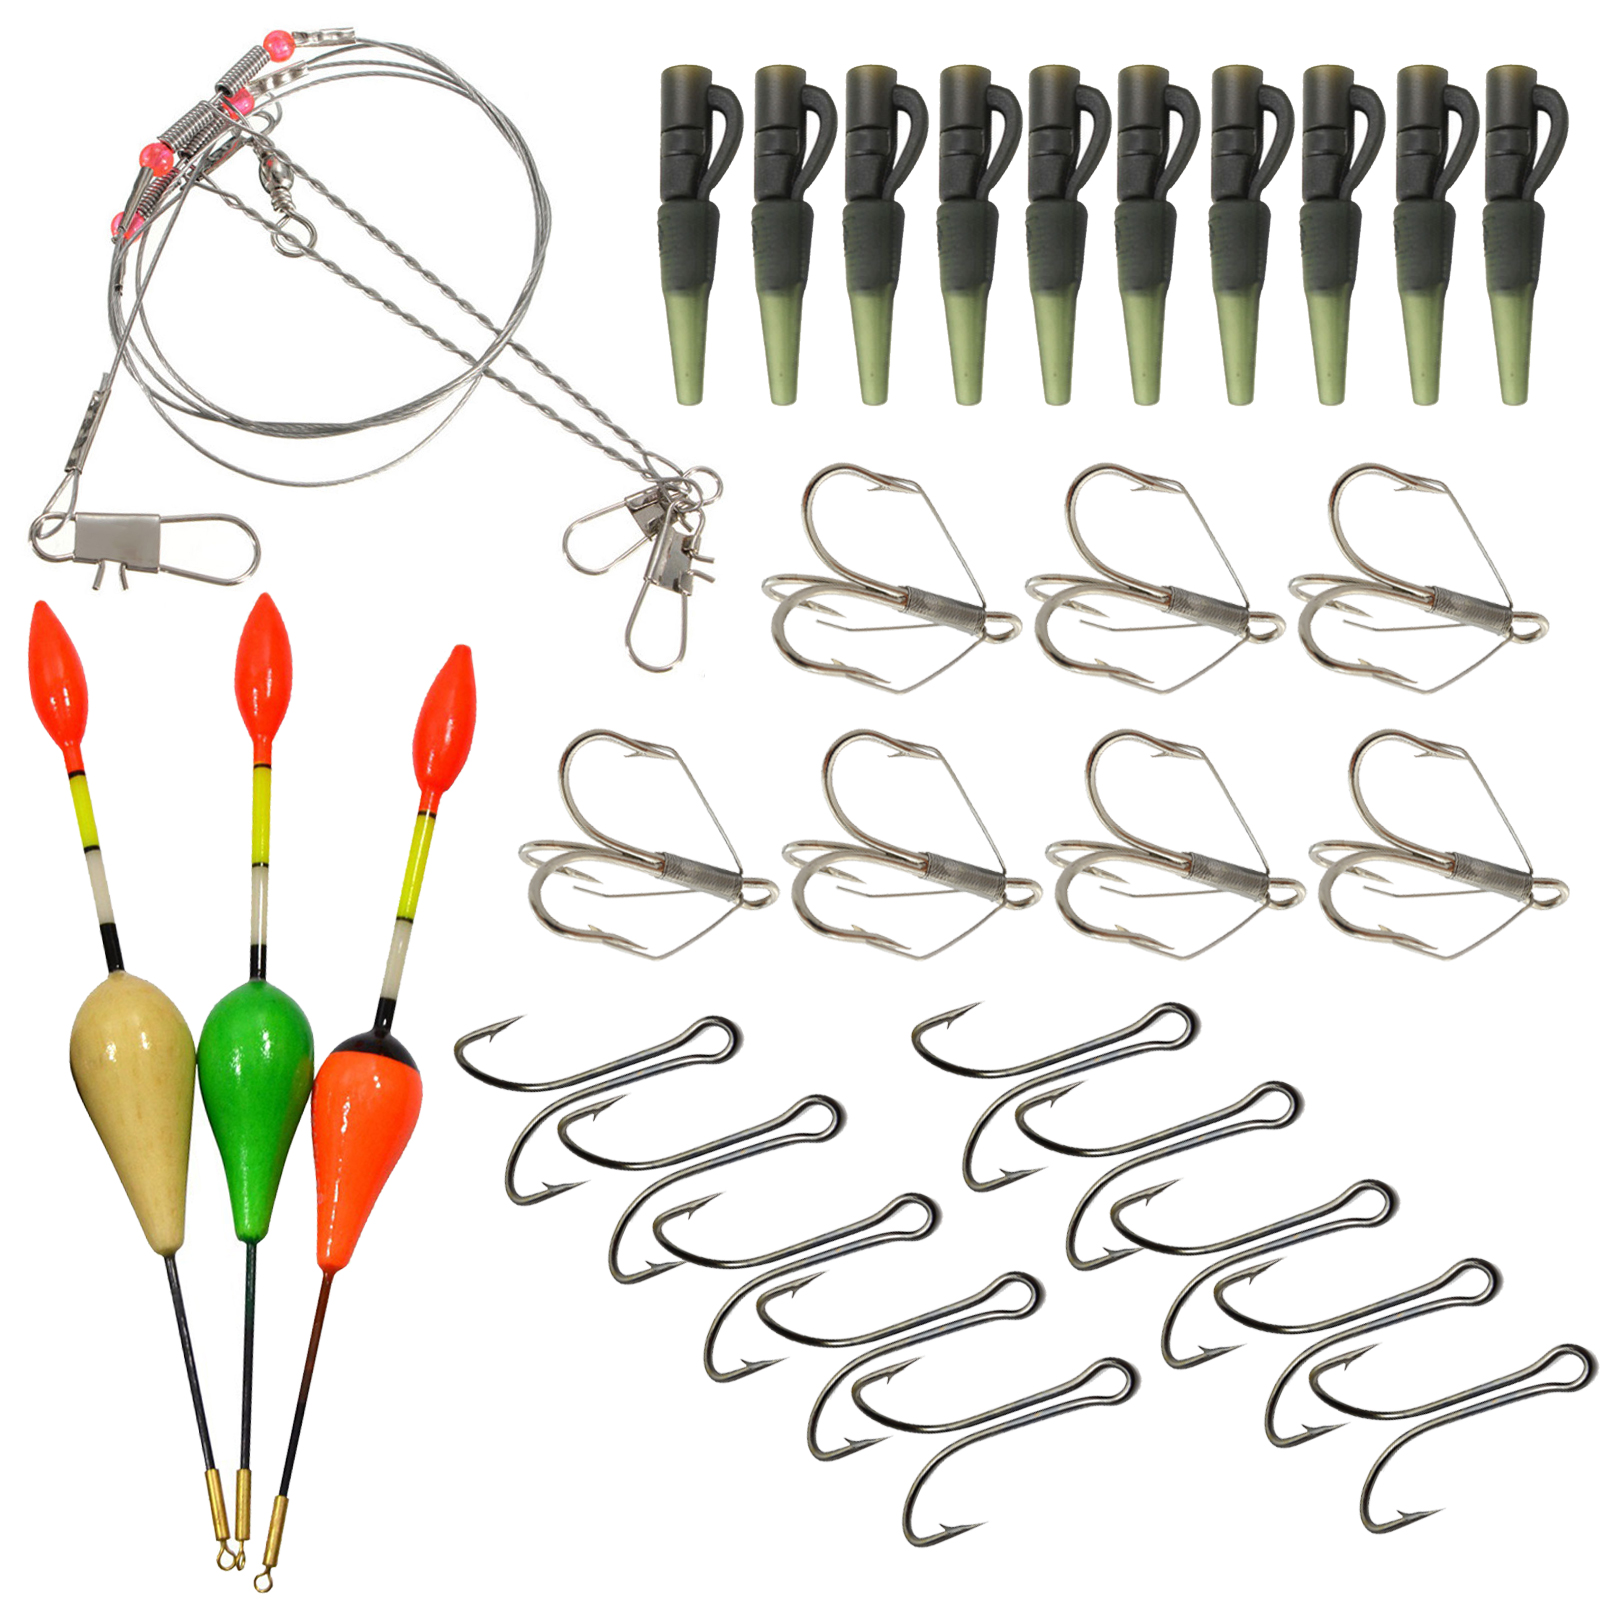 FREE FISHER 31pcs Carp Fishing Tackle Kit Weedless Treble Hooks 2-4g Wood Floats 3-Arm Steel Wire Double Fishhook Trolling Positioning Pin